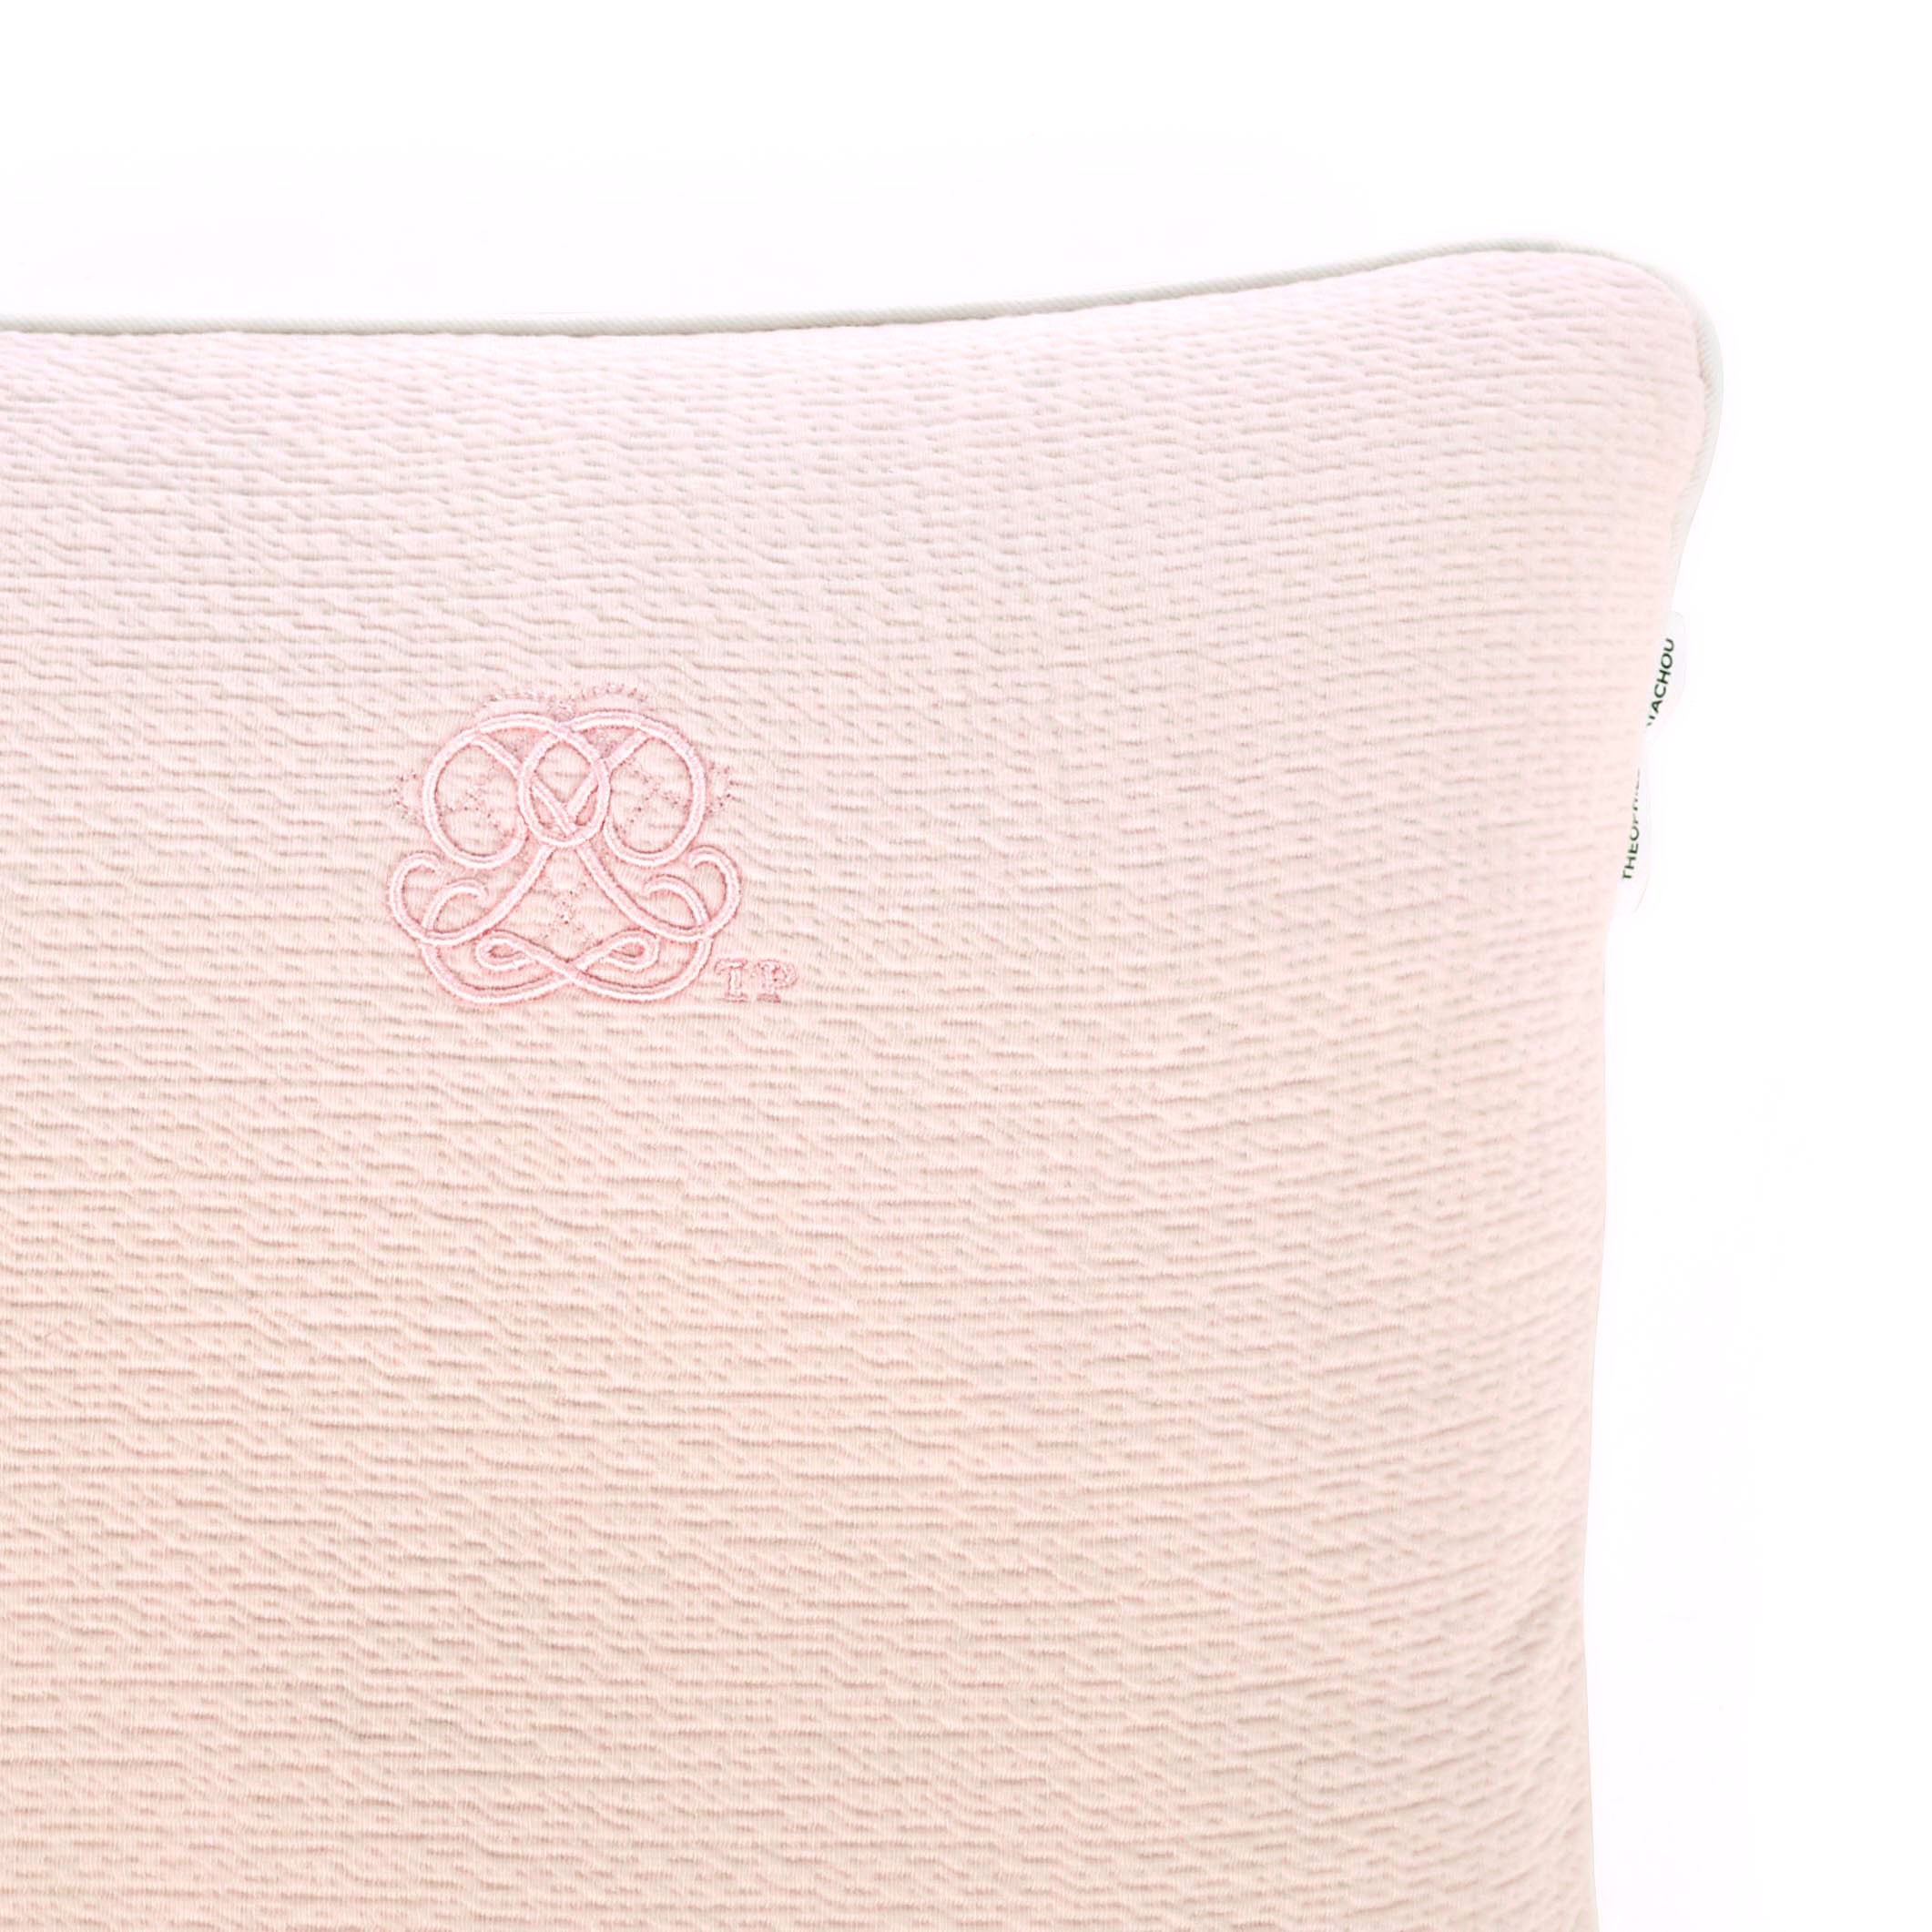 Theophile & Patachou Embroidered Cushion - Cotton Pink